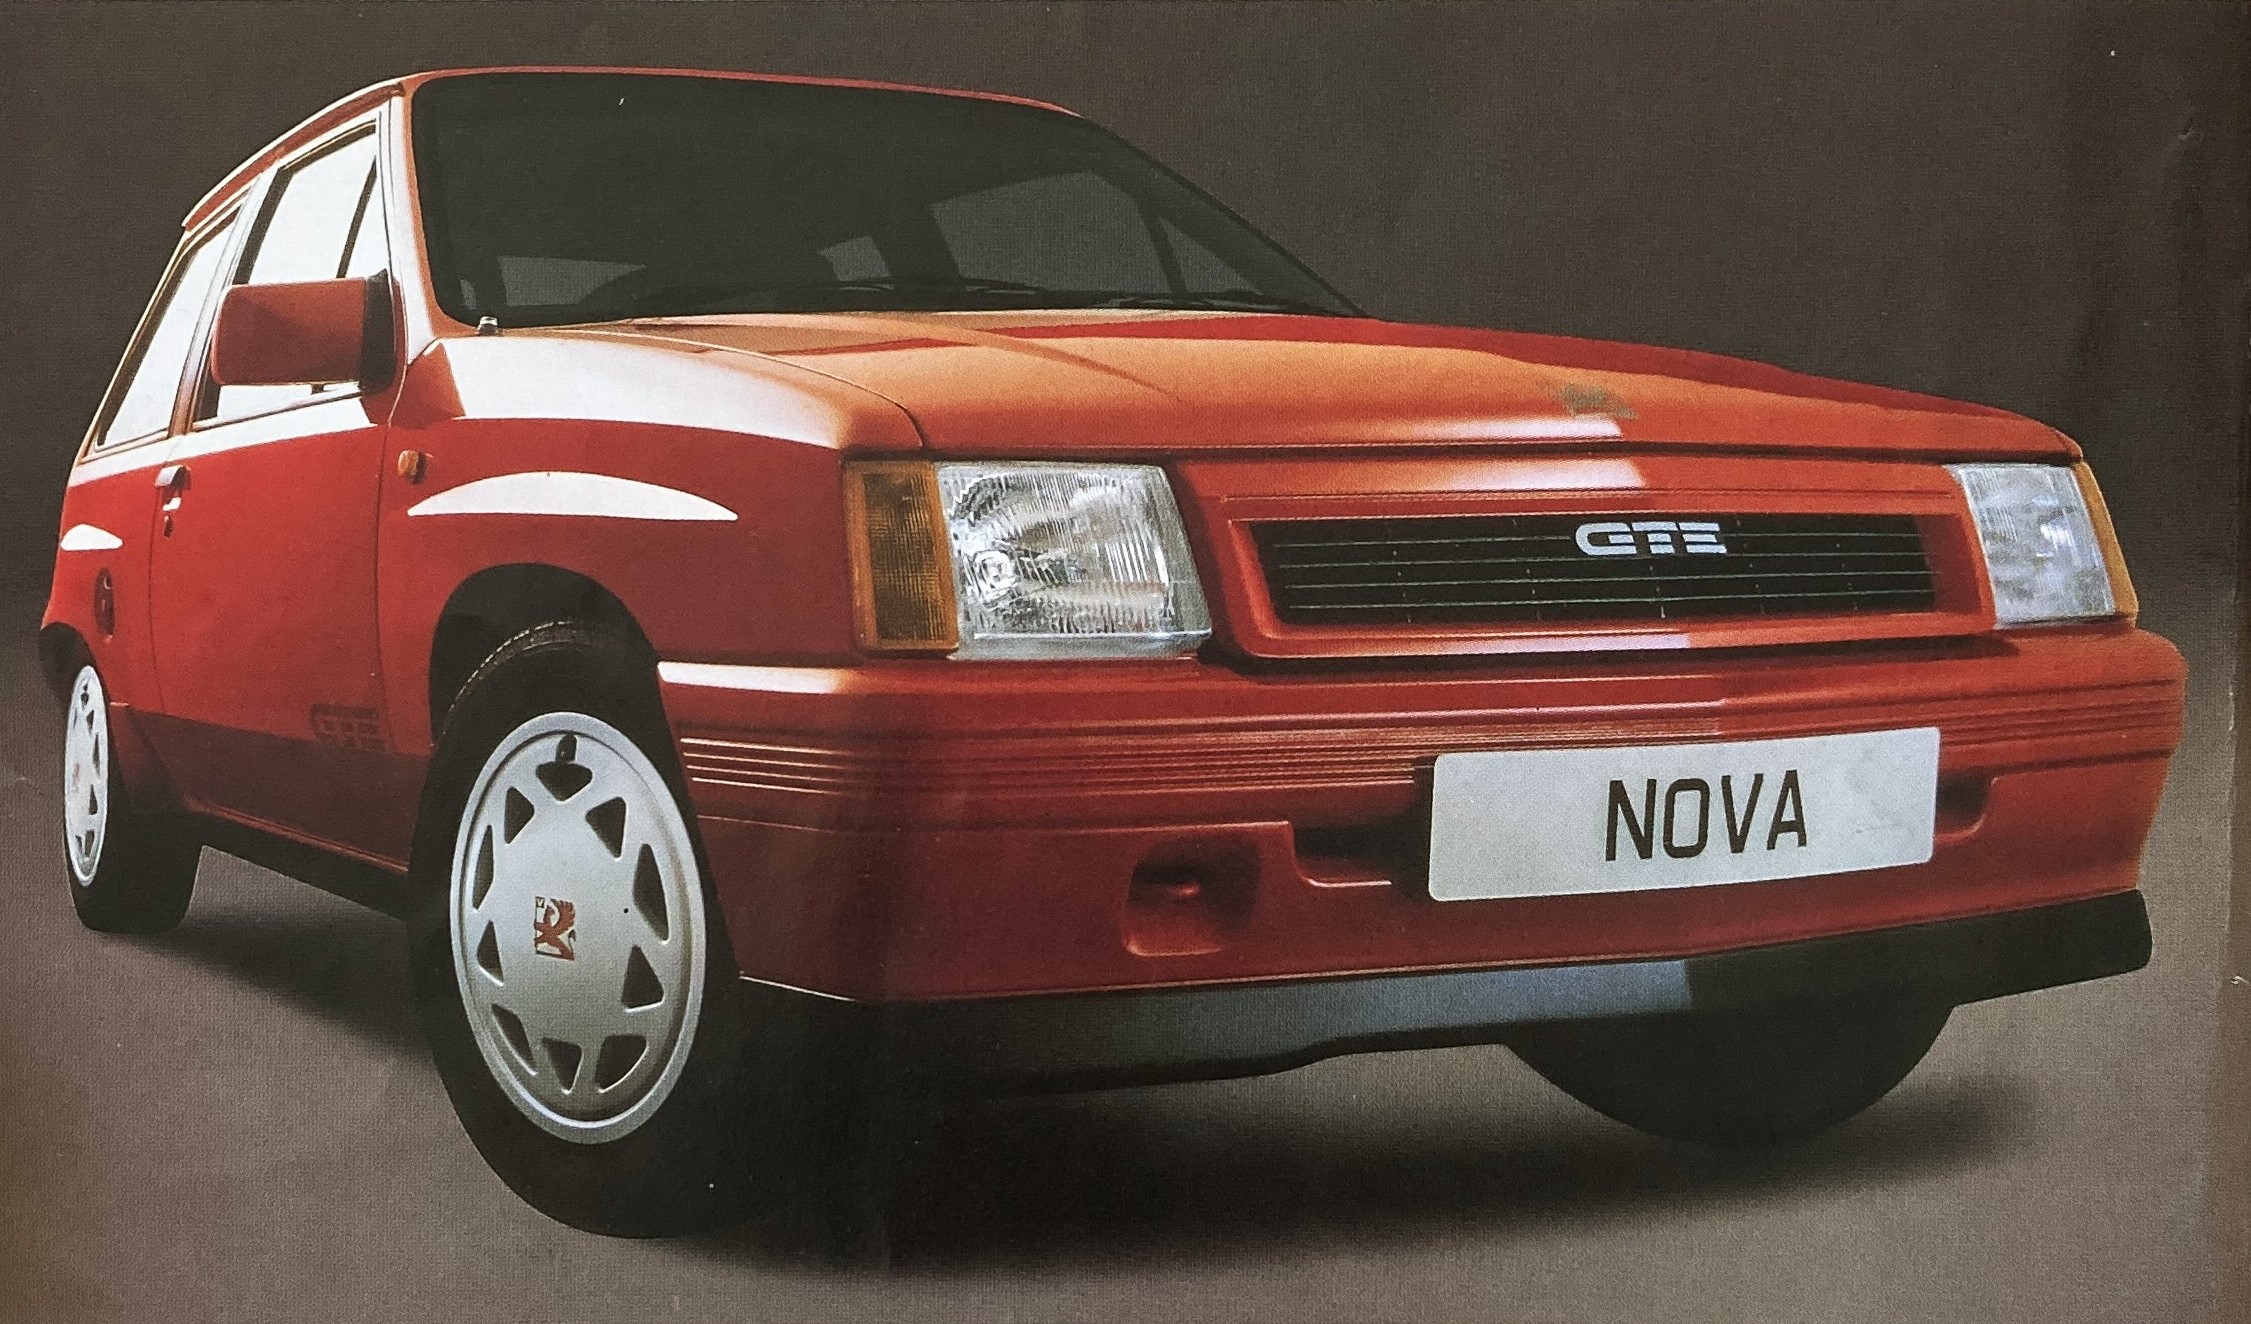 Ad Break: The Vauxhall Nova GTE Was Too Hot for an XR2 to Handle